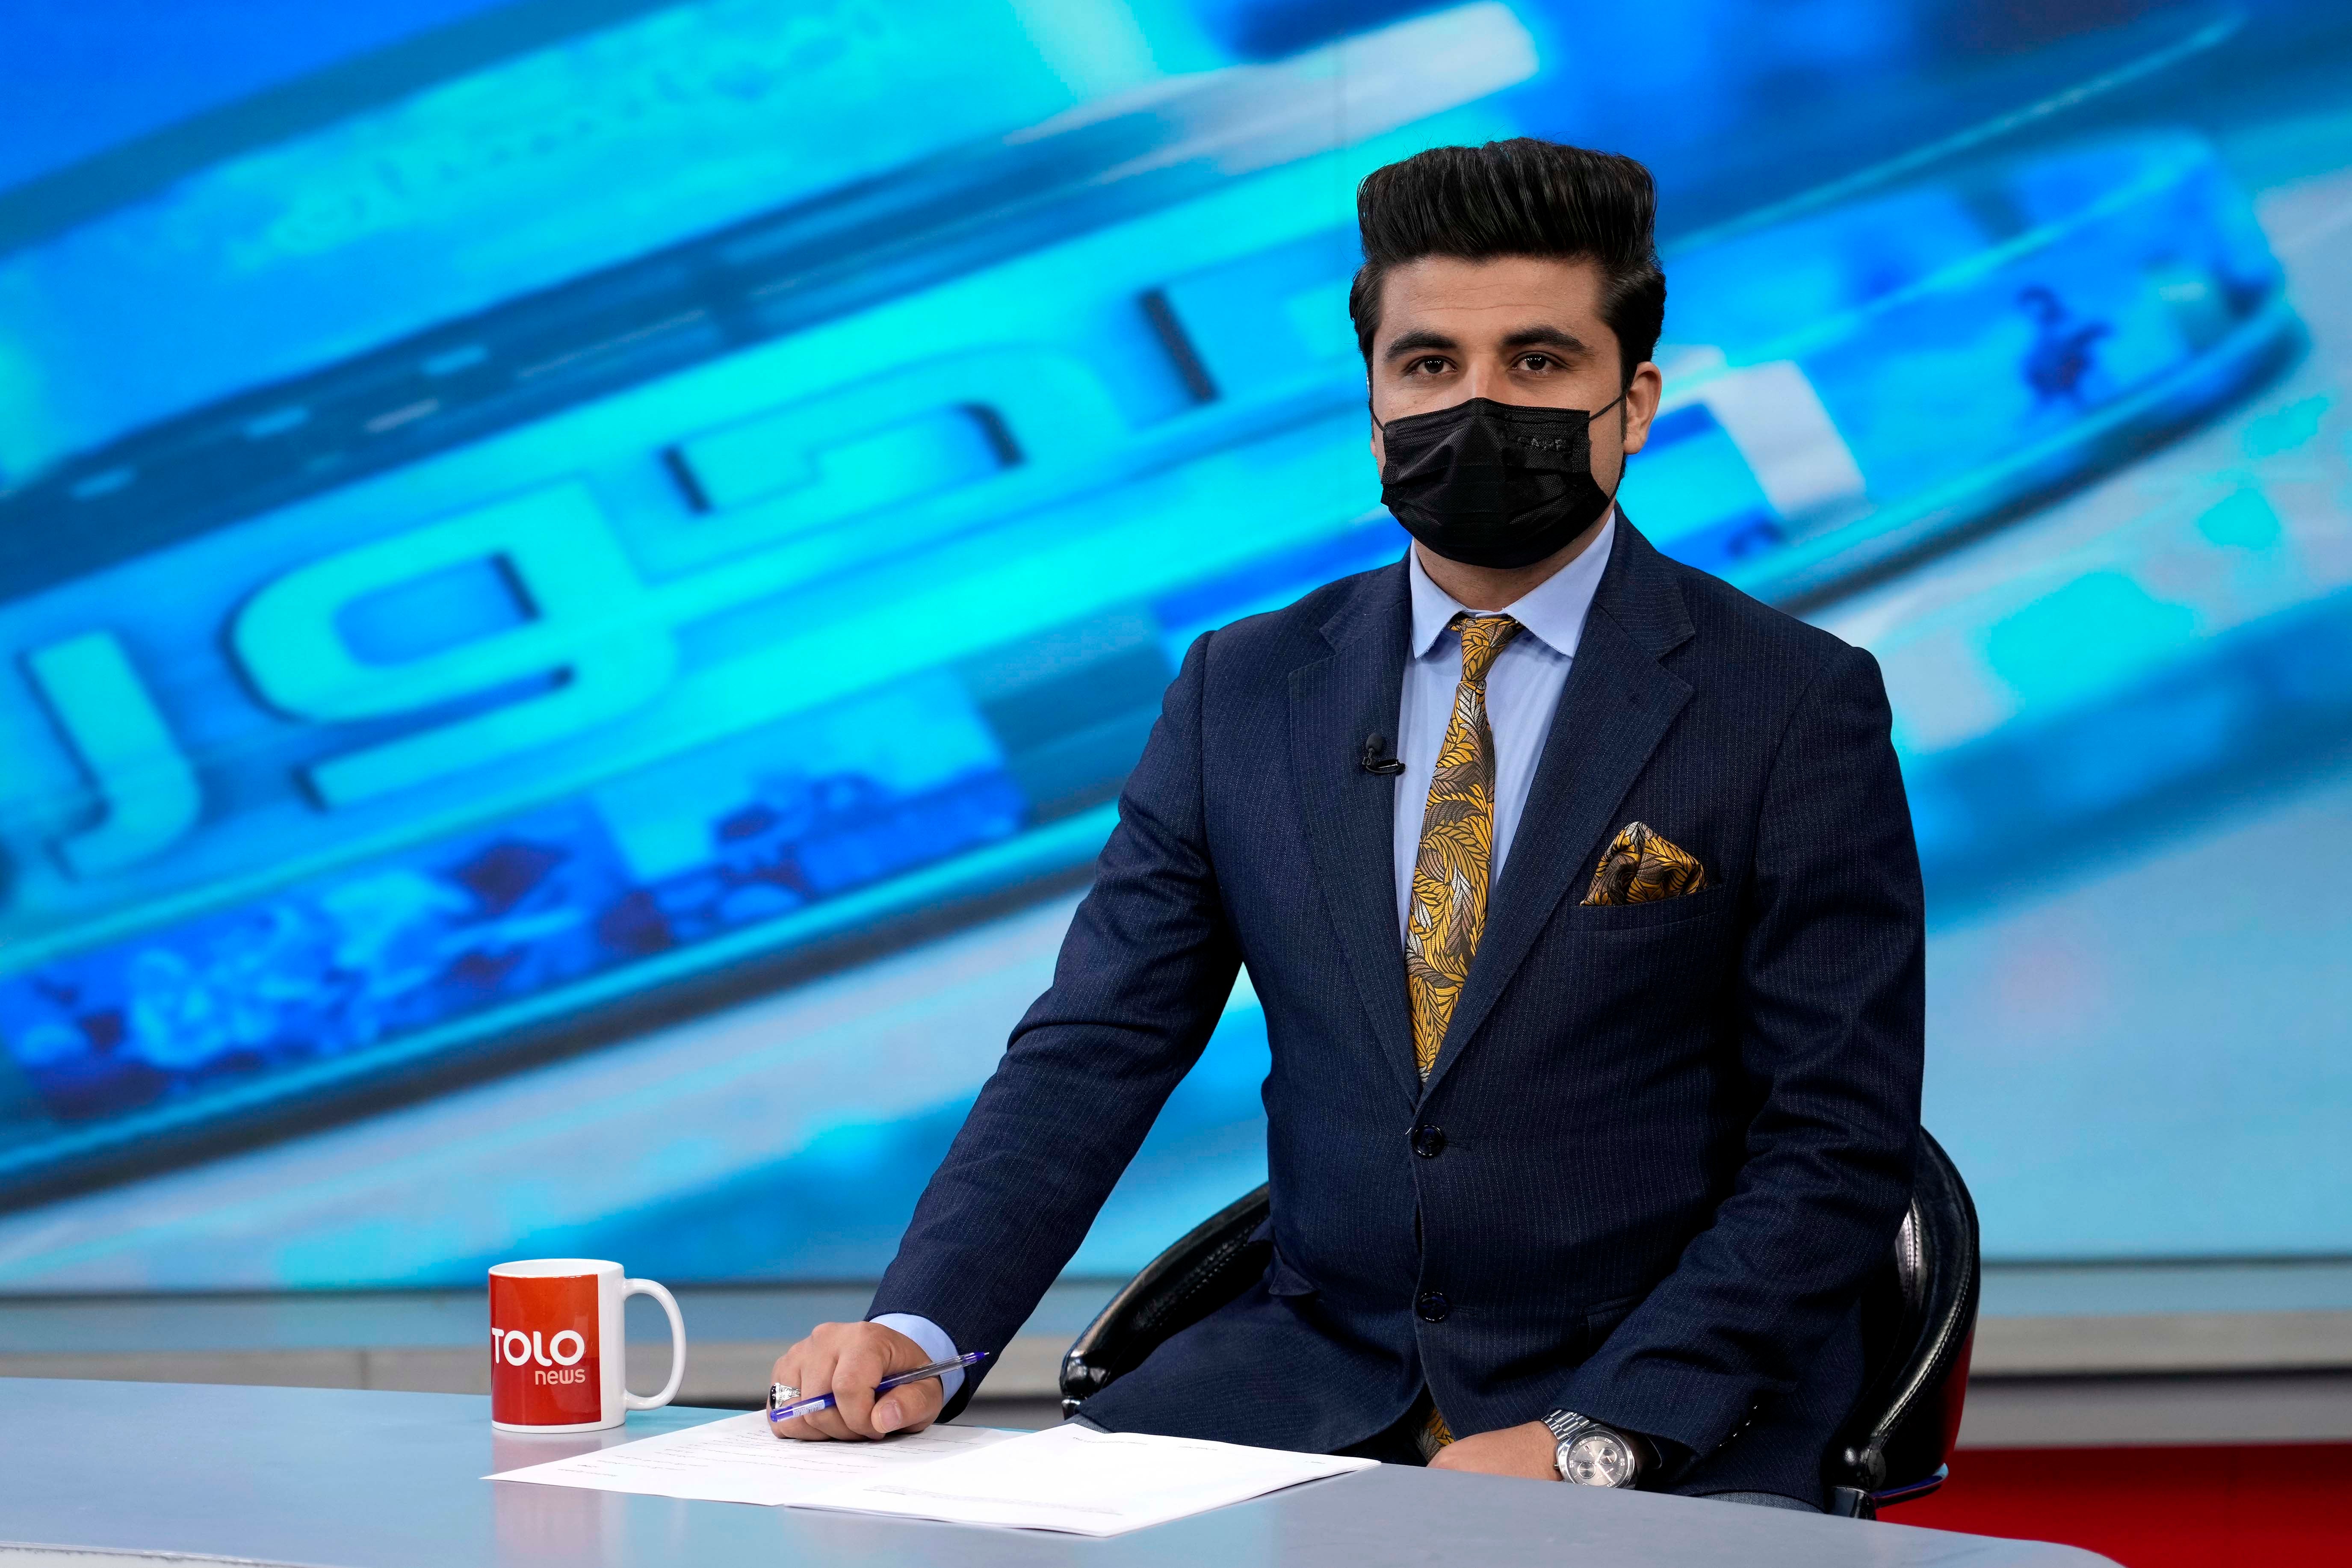 A tv anchor wears a face mask on the air